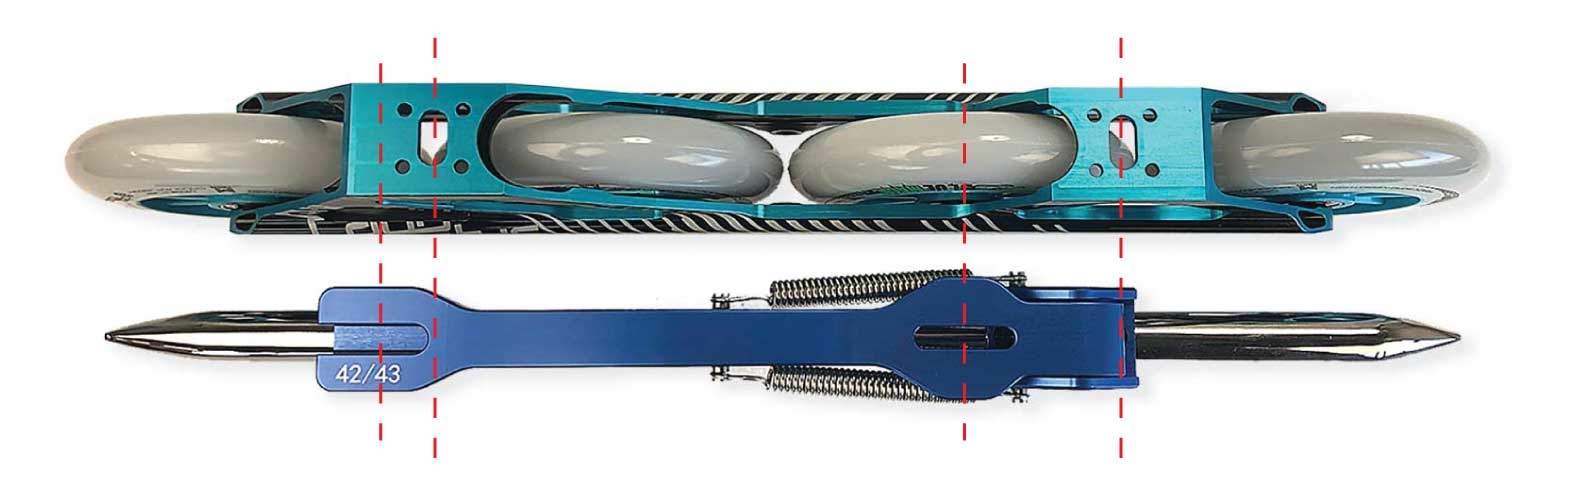 Mounting an inline frame or an ice blade comparison